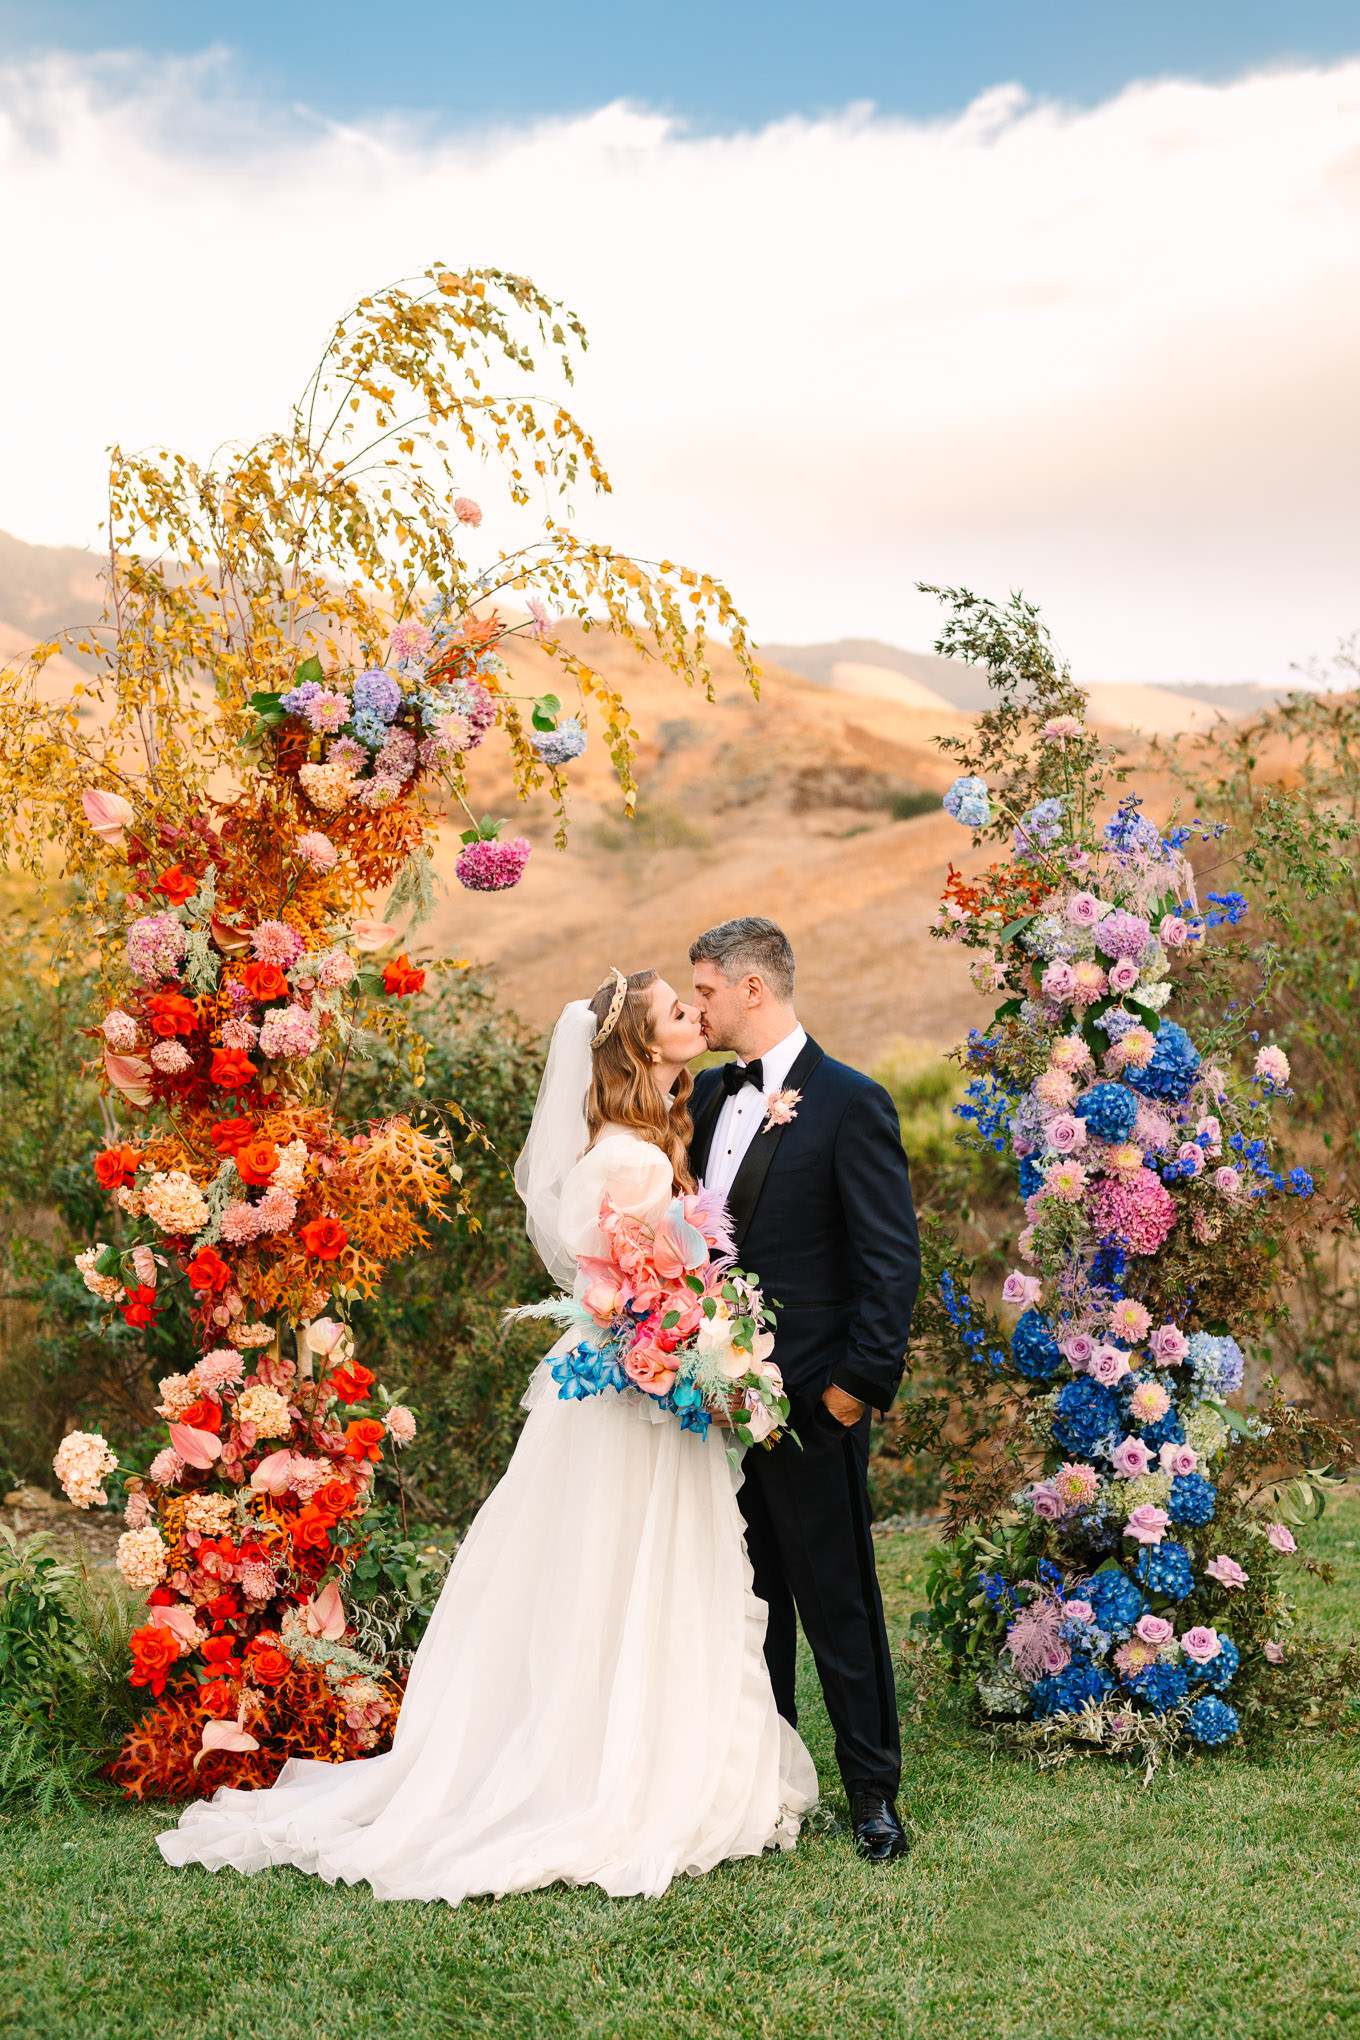 Allison Harvard & Jeremy Burke's floral wedding ceremony | Colorful and quirky wedding at Higuera Ranch in San Luis Obispo | #sanluisobispowedding #californiawedding #higueraranch #madonnainn   Source: Mary Costa Photography | Los Angeles